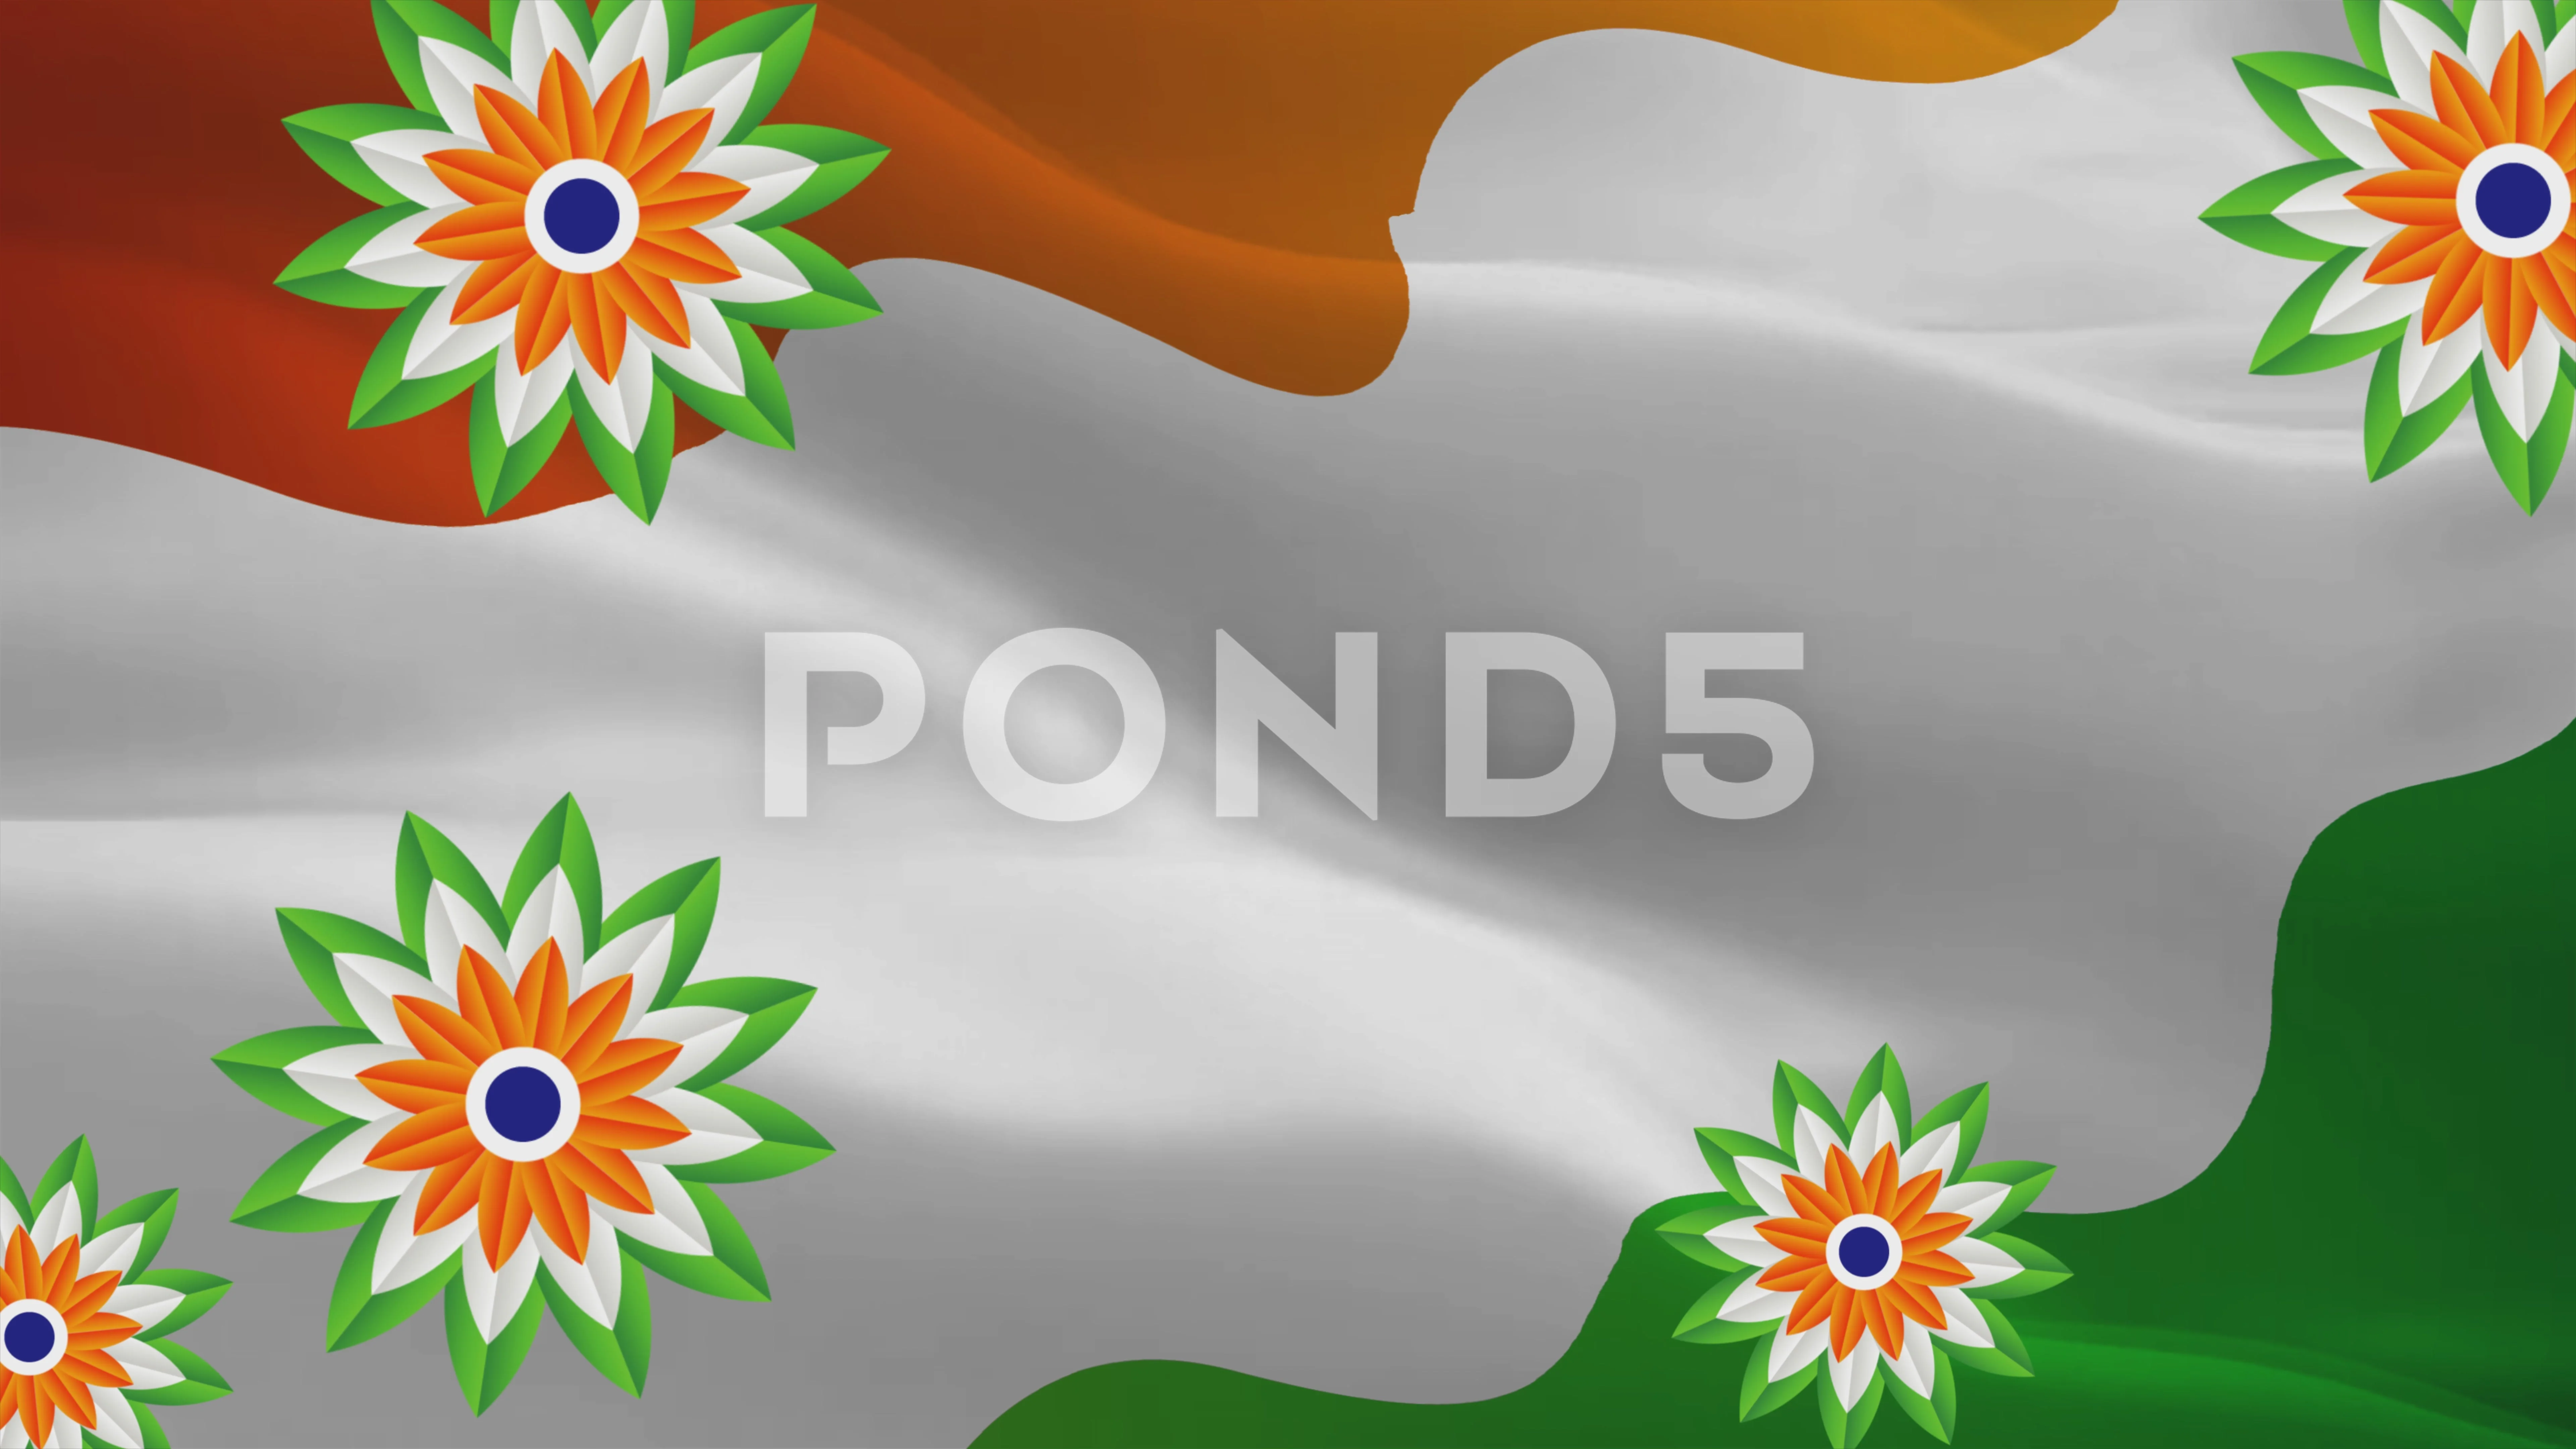 India flag drawing Stock Photos and Images | agefotostock